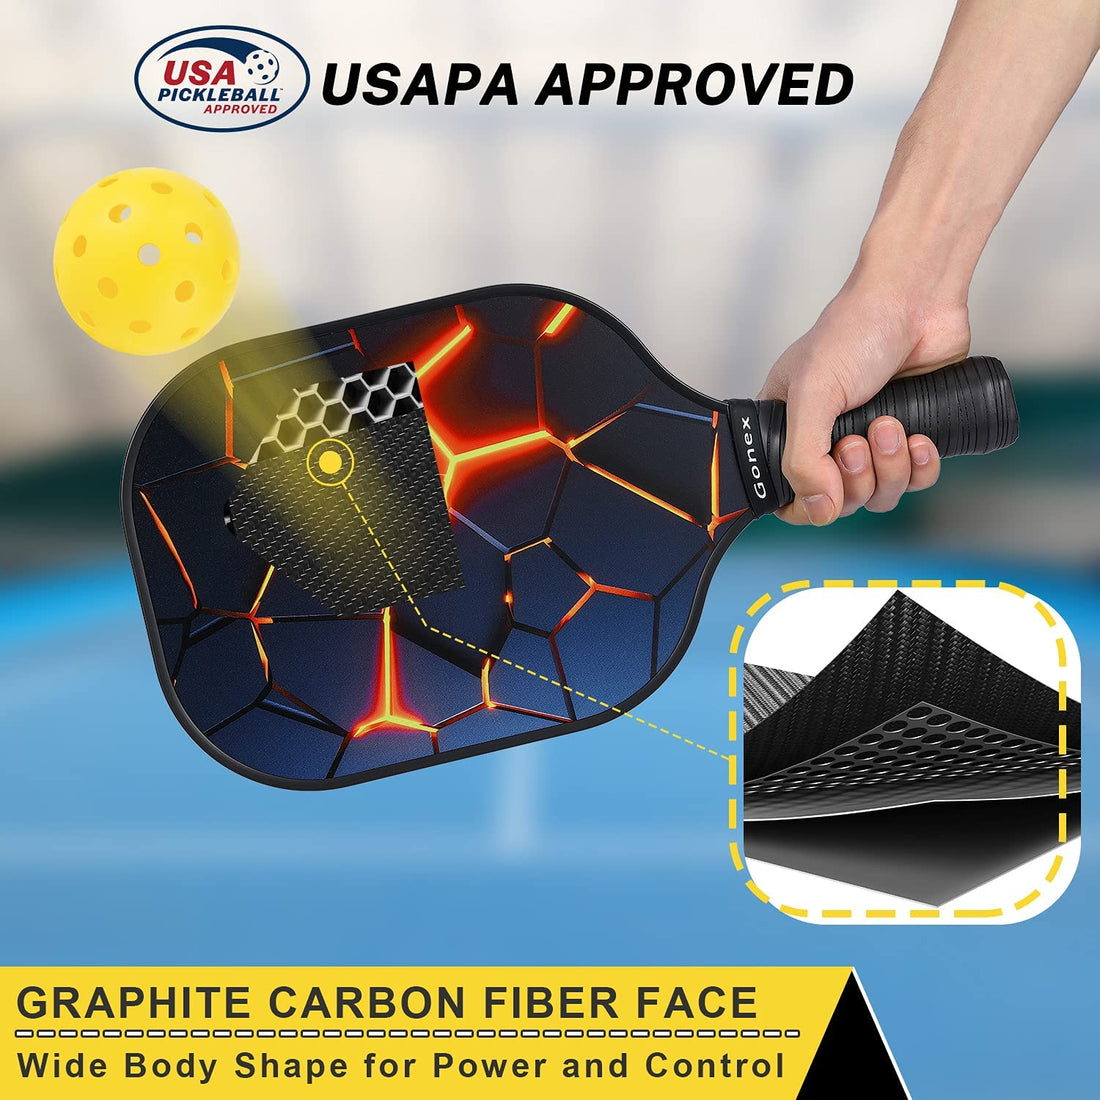 Best usapa approved pickleball paddles